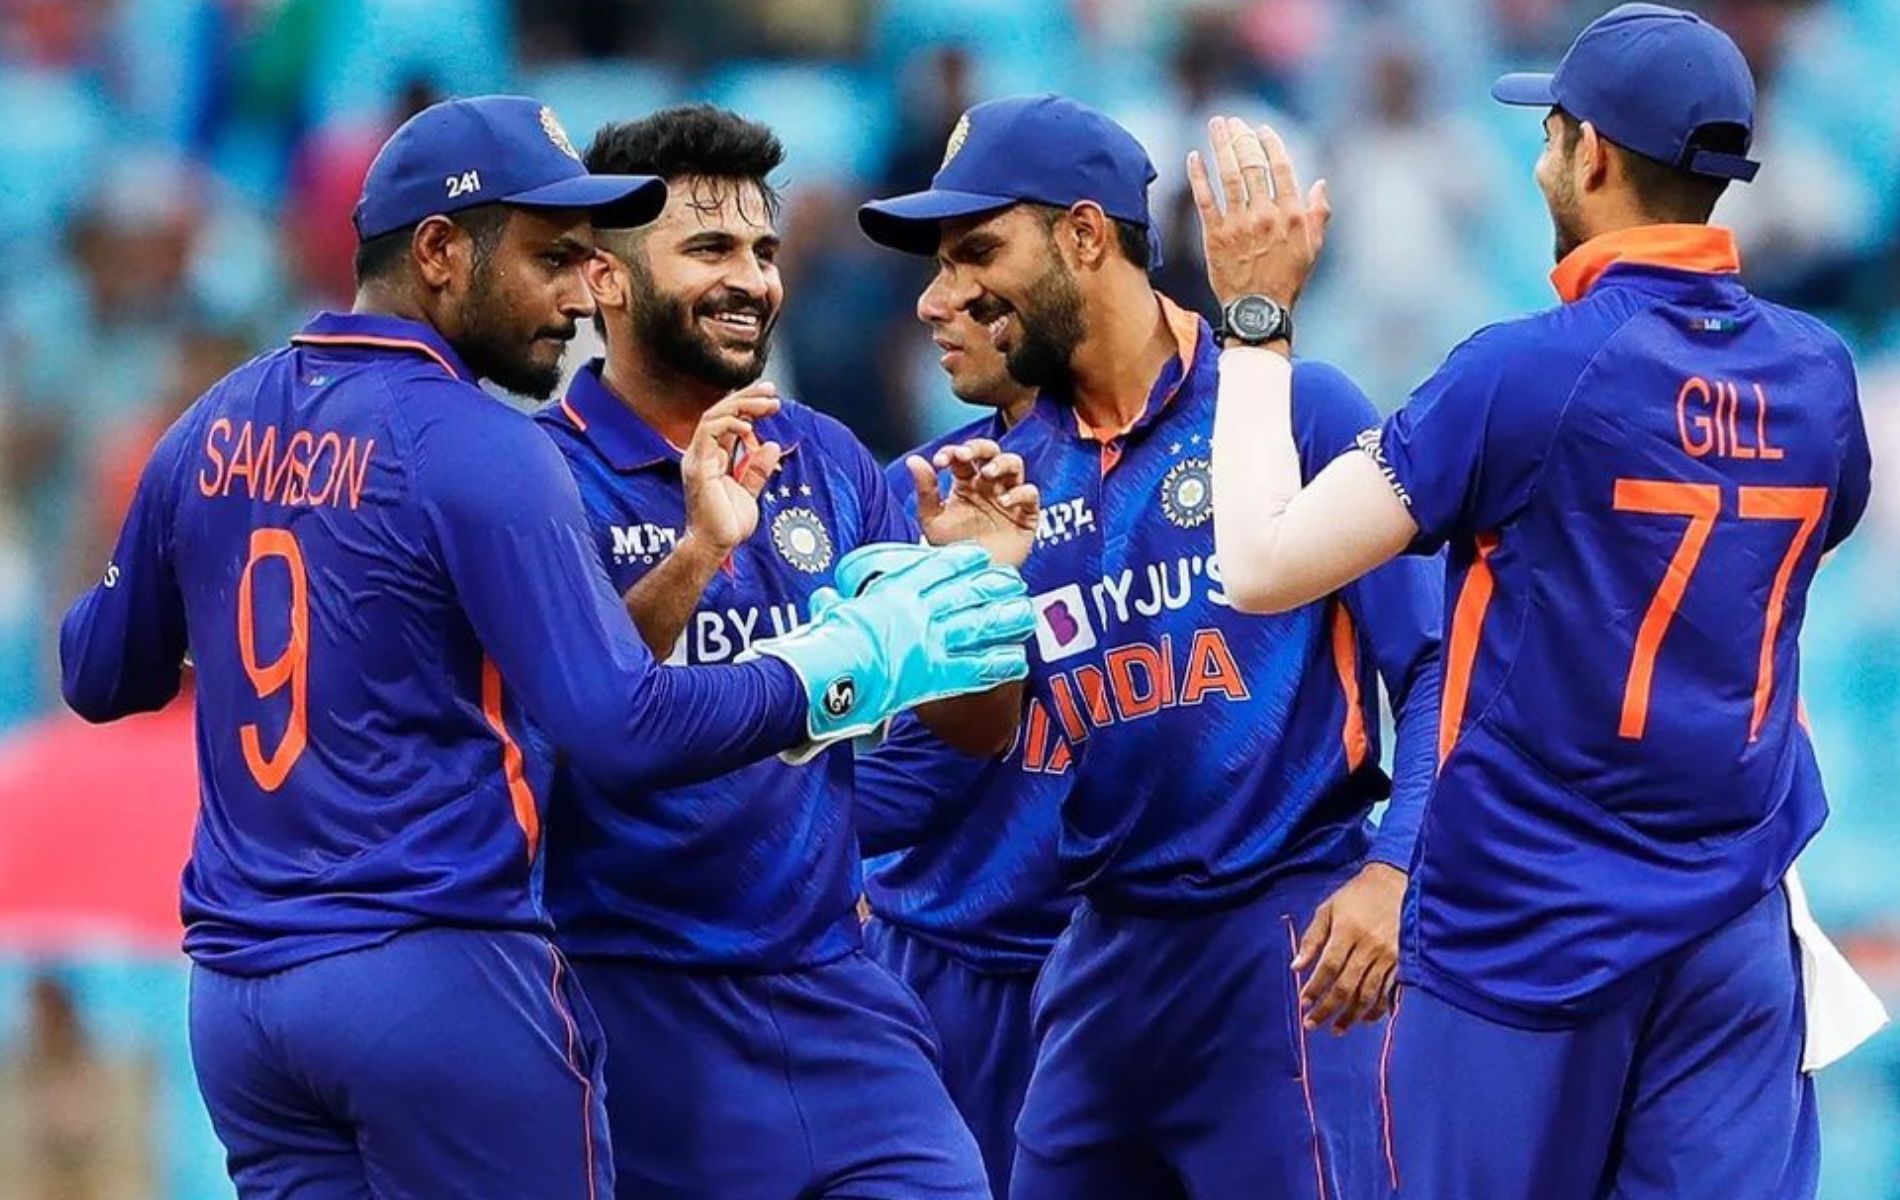 India suffered a nine-run loss to South Africa on Thursday. (Pic: Instagram)